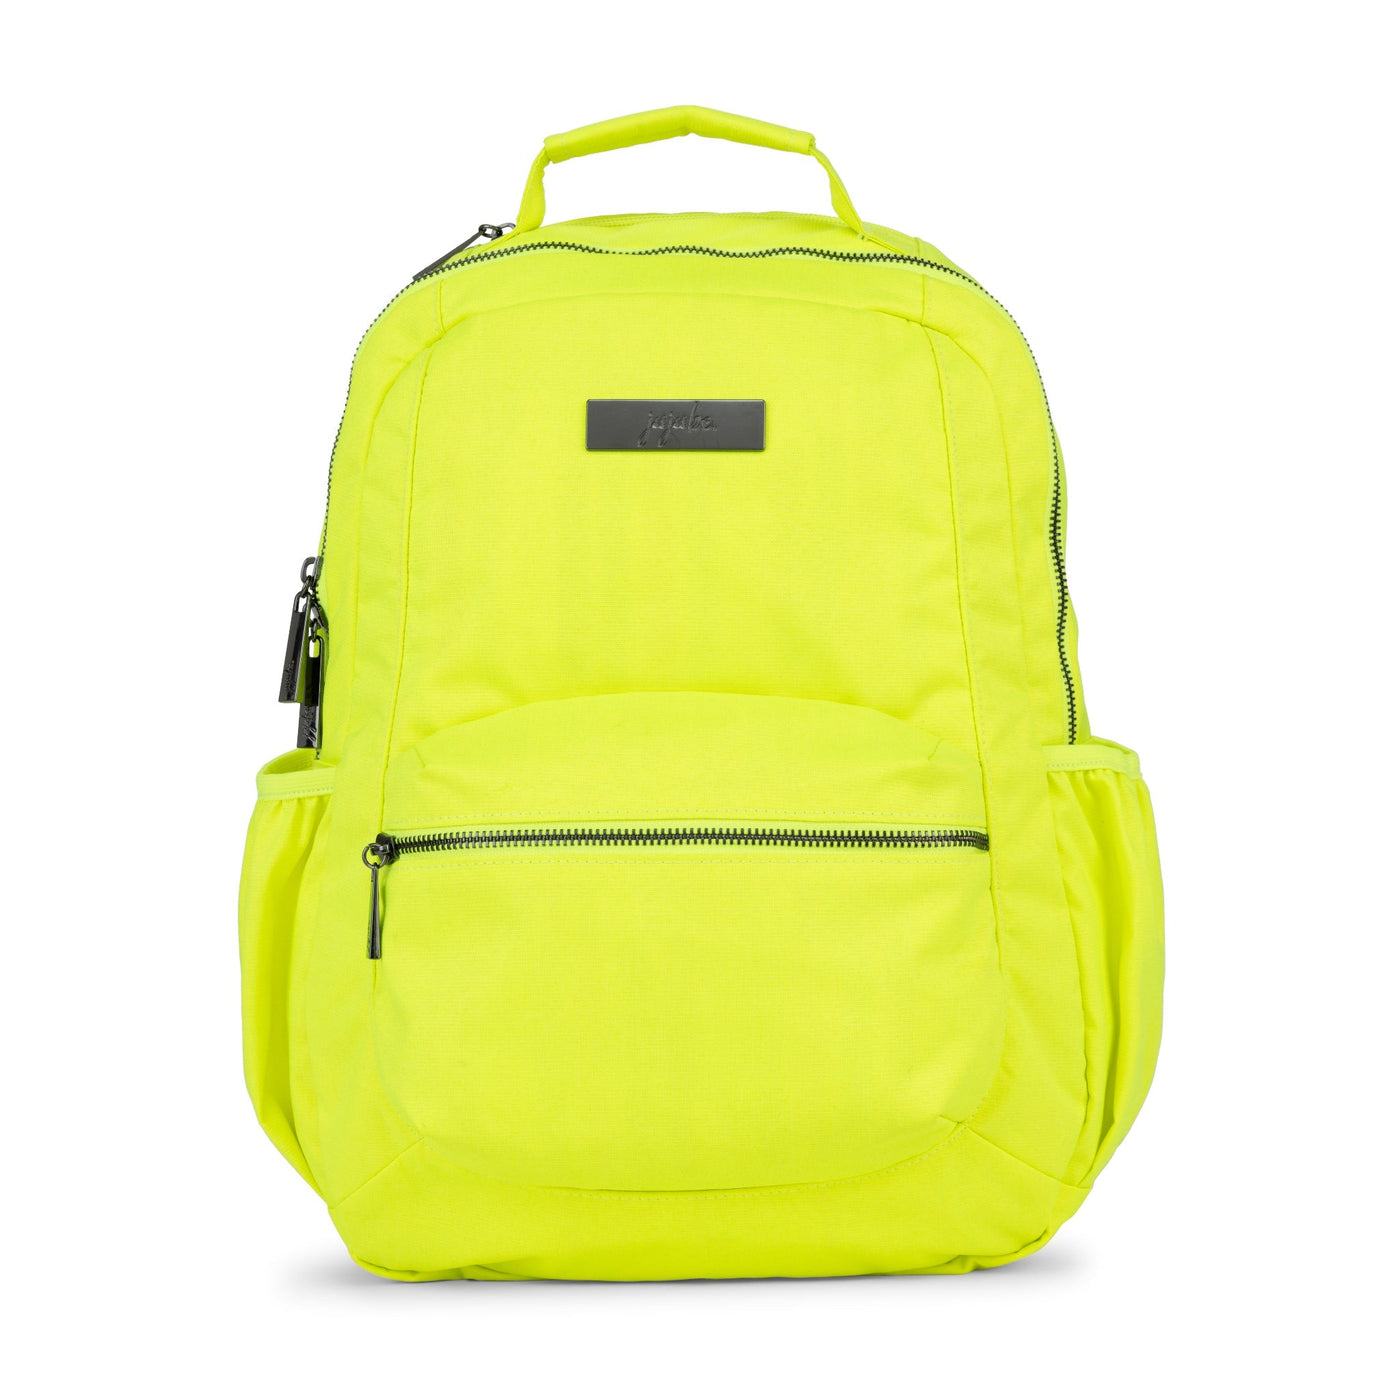 Be Packed - Highlighter Yellow